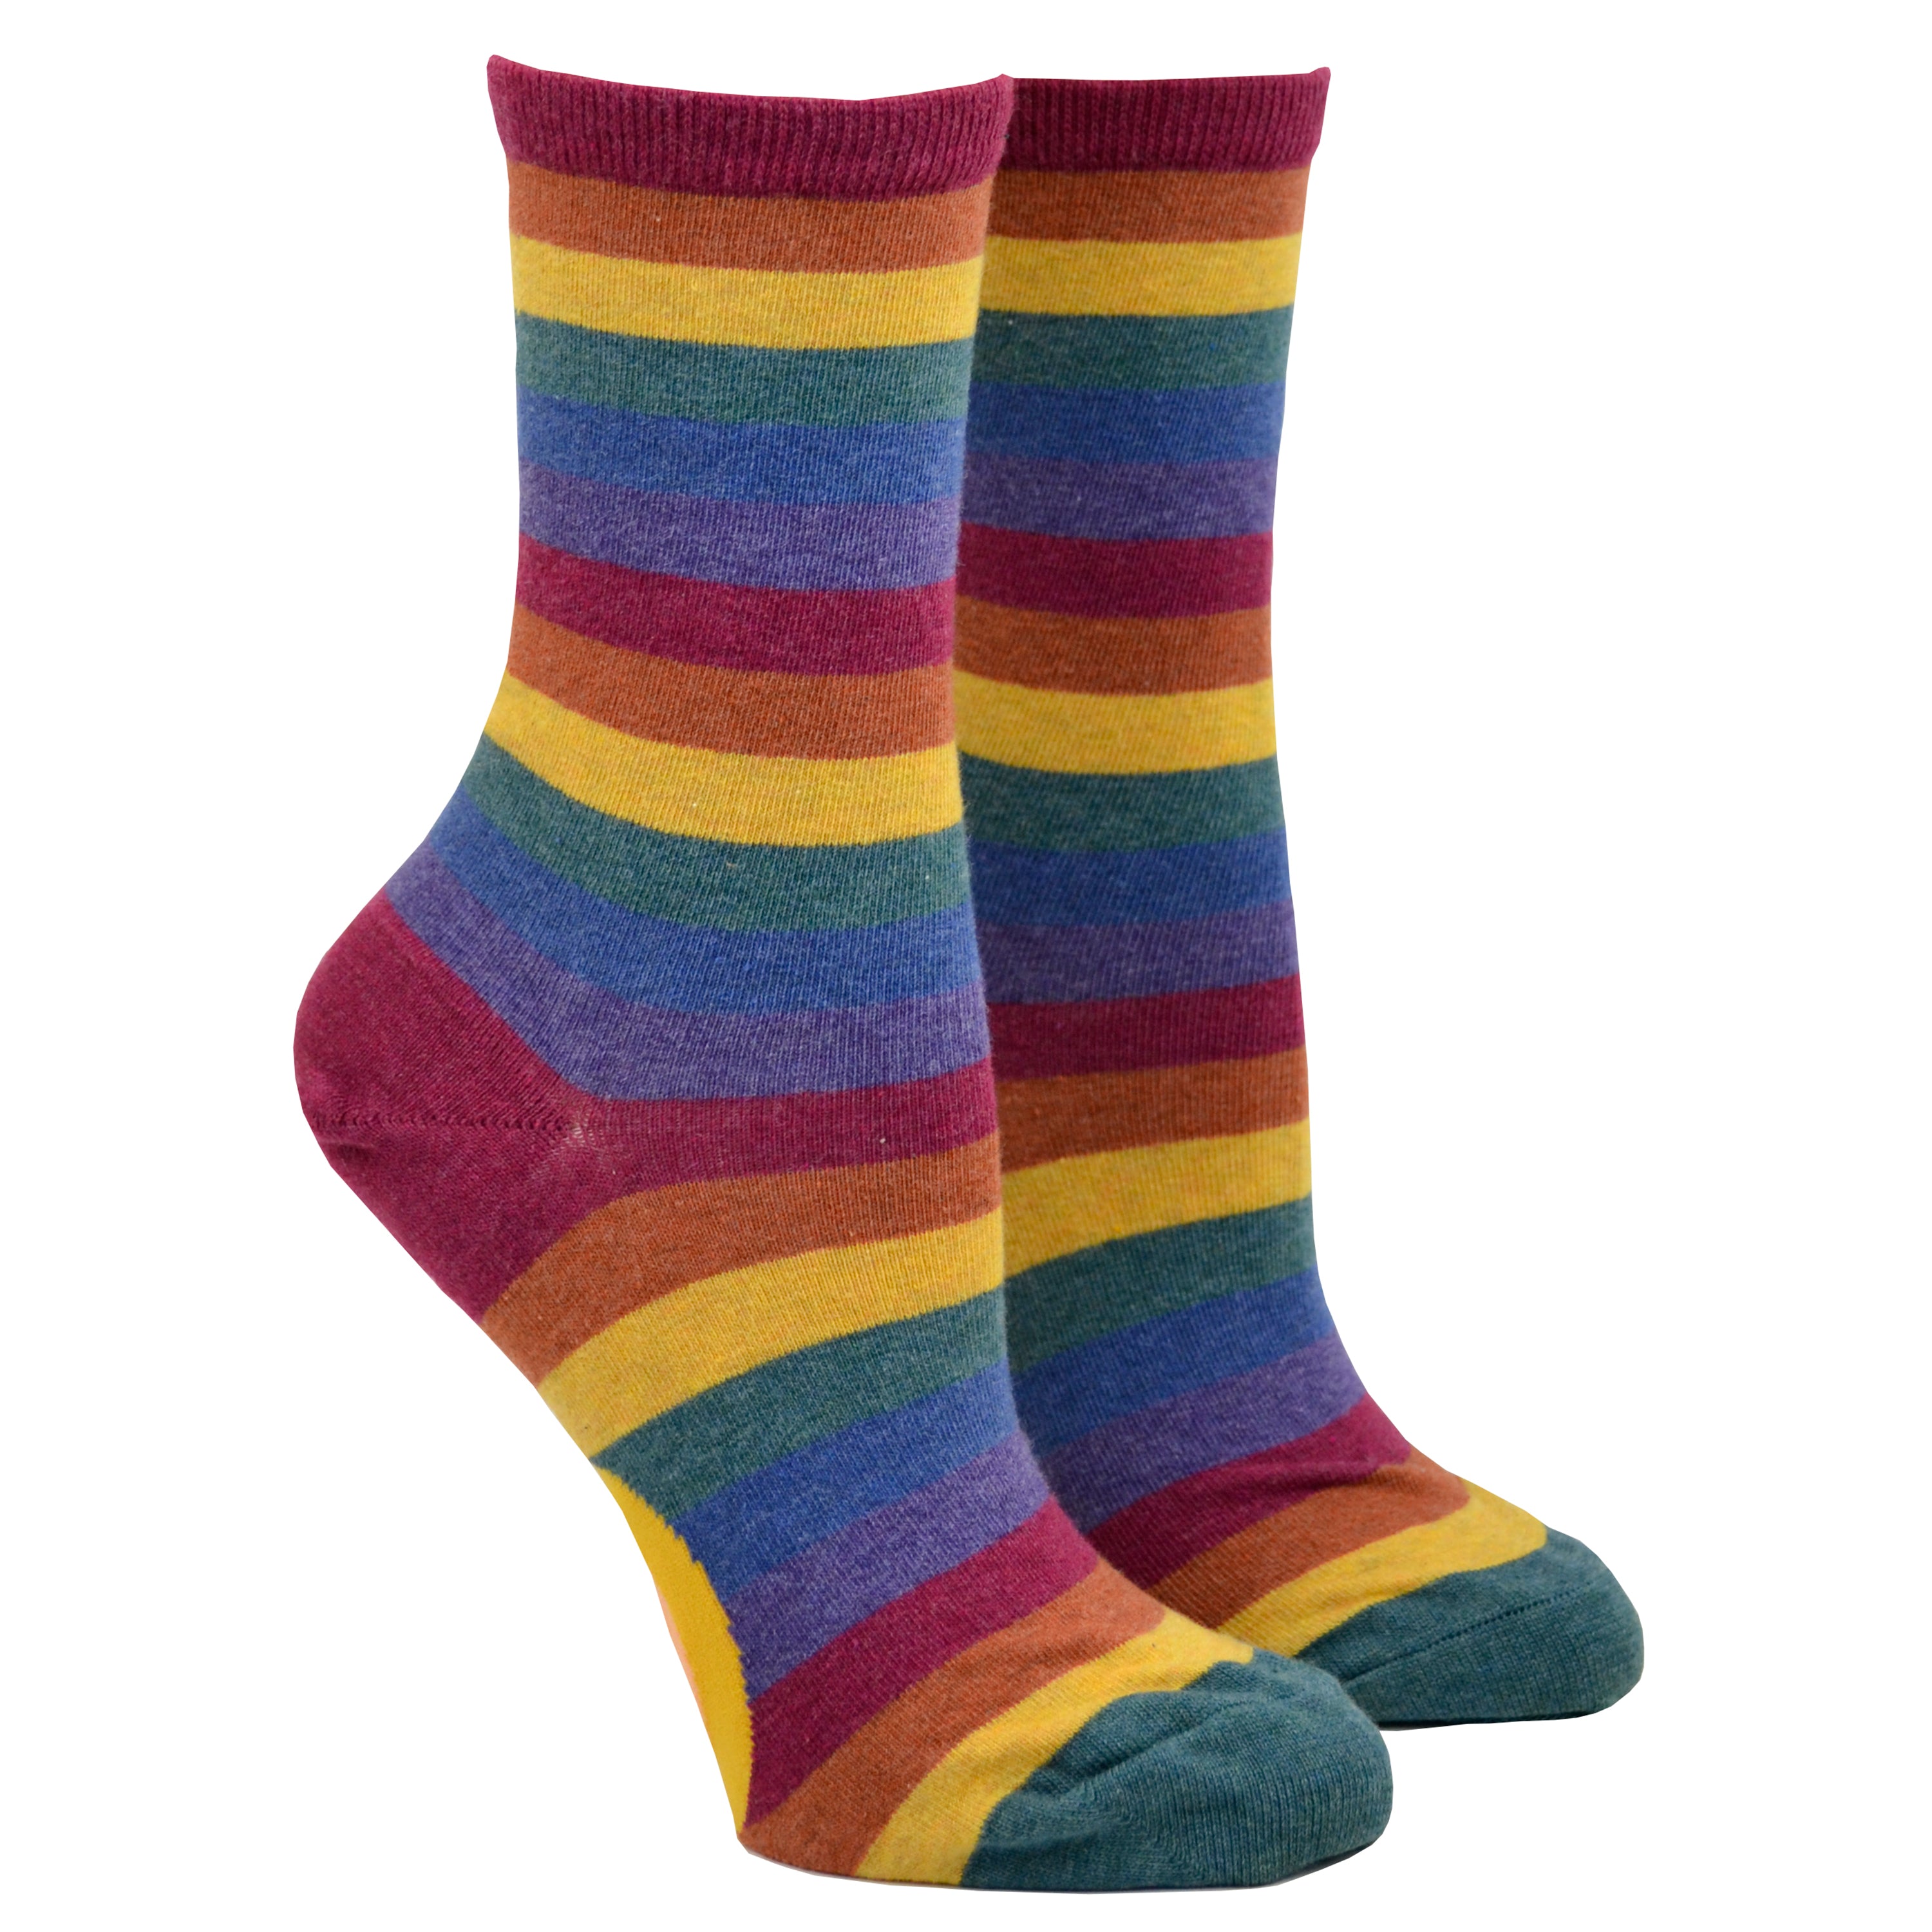 Shown on leg forms, a pair of women's cotton crew socks by ModSocks. These socks feature a muted rainbow stripe in red, burnt orange, matte gold, emerald green, dark blue, and purple.